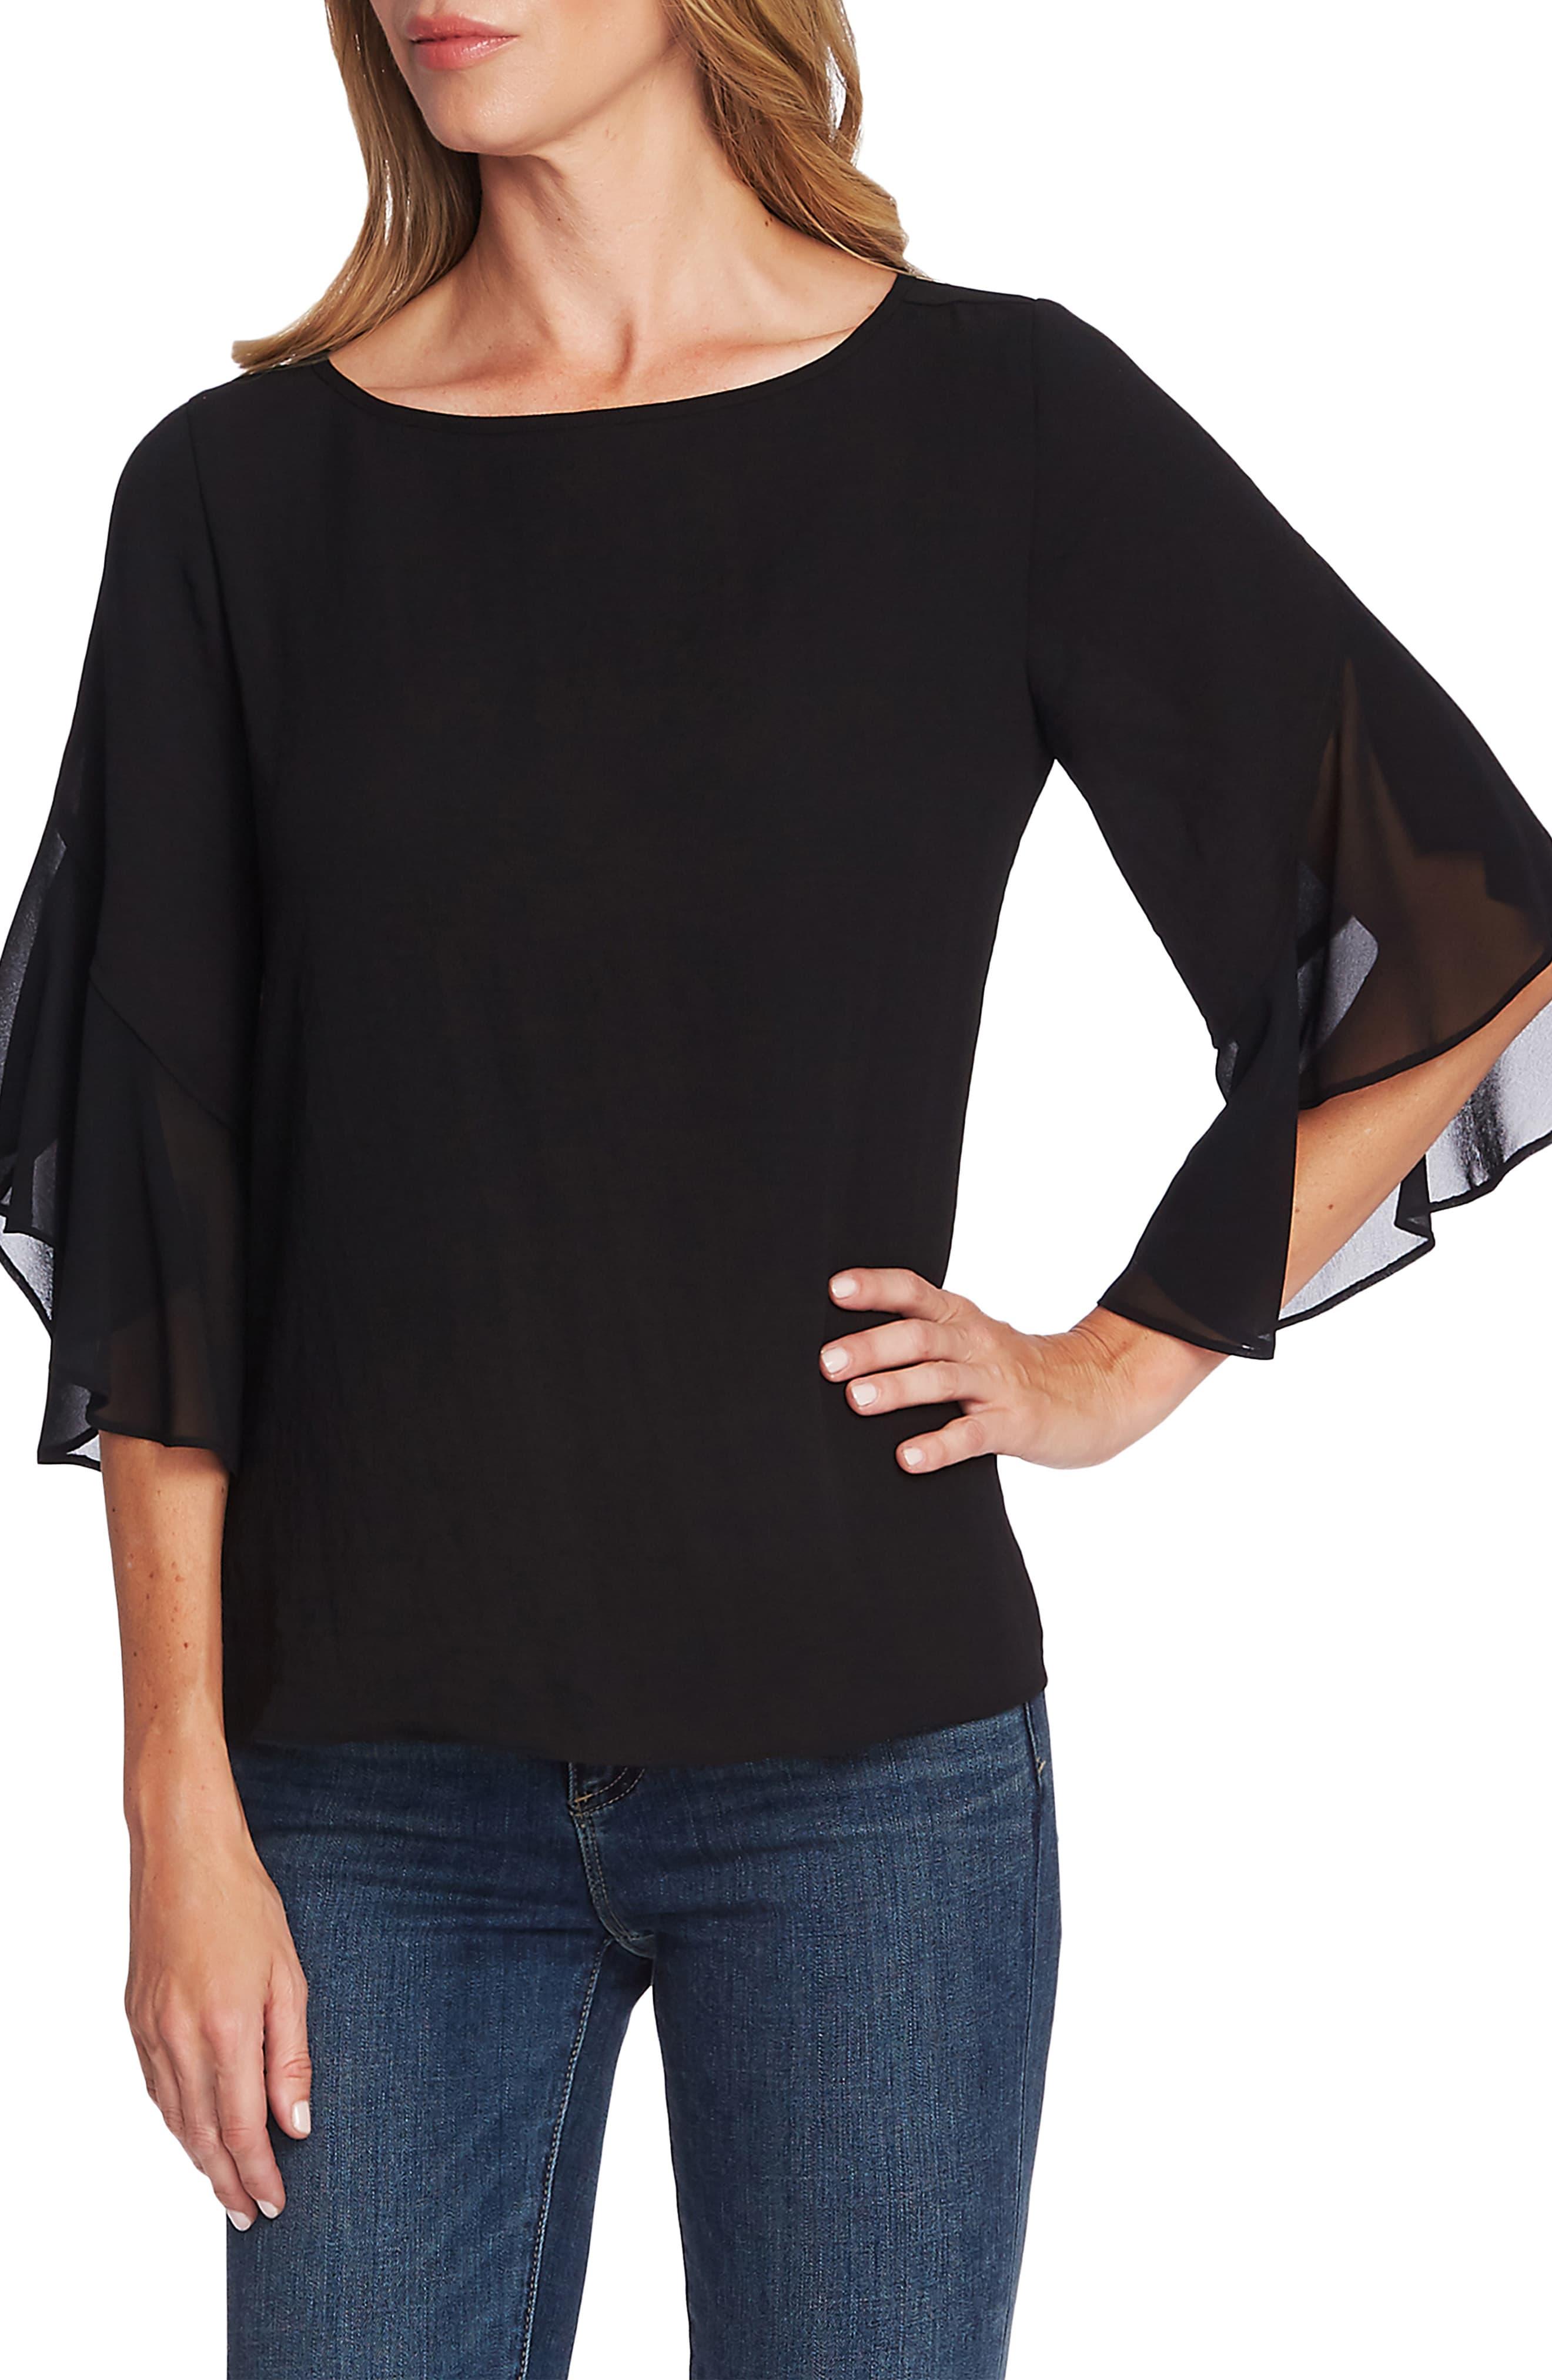 Vince Camuto Chiffon Detail Ruffle Sleeve Blouse in Black - Lyst